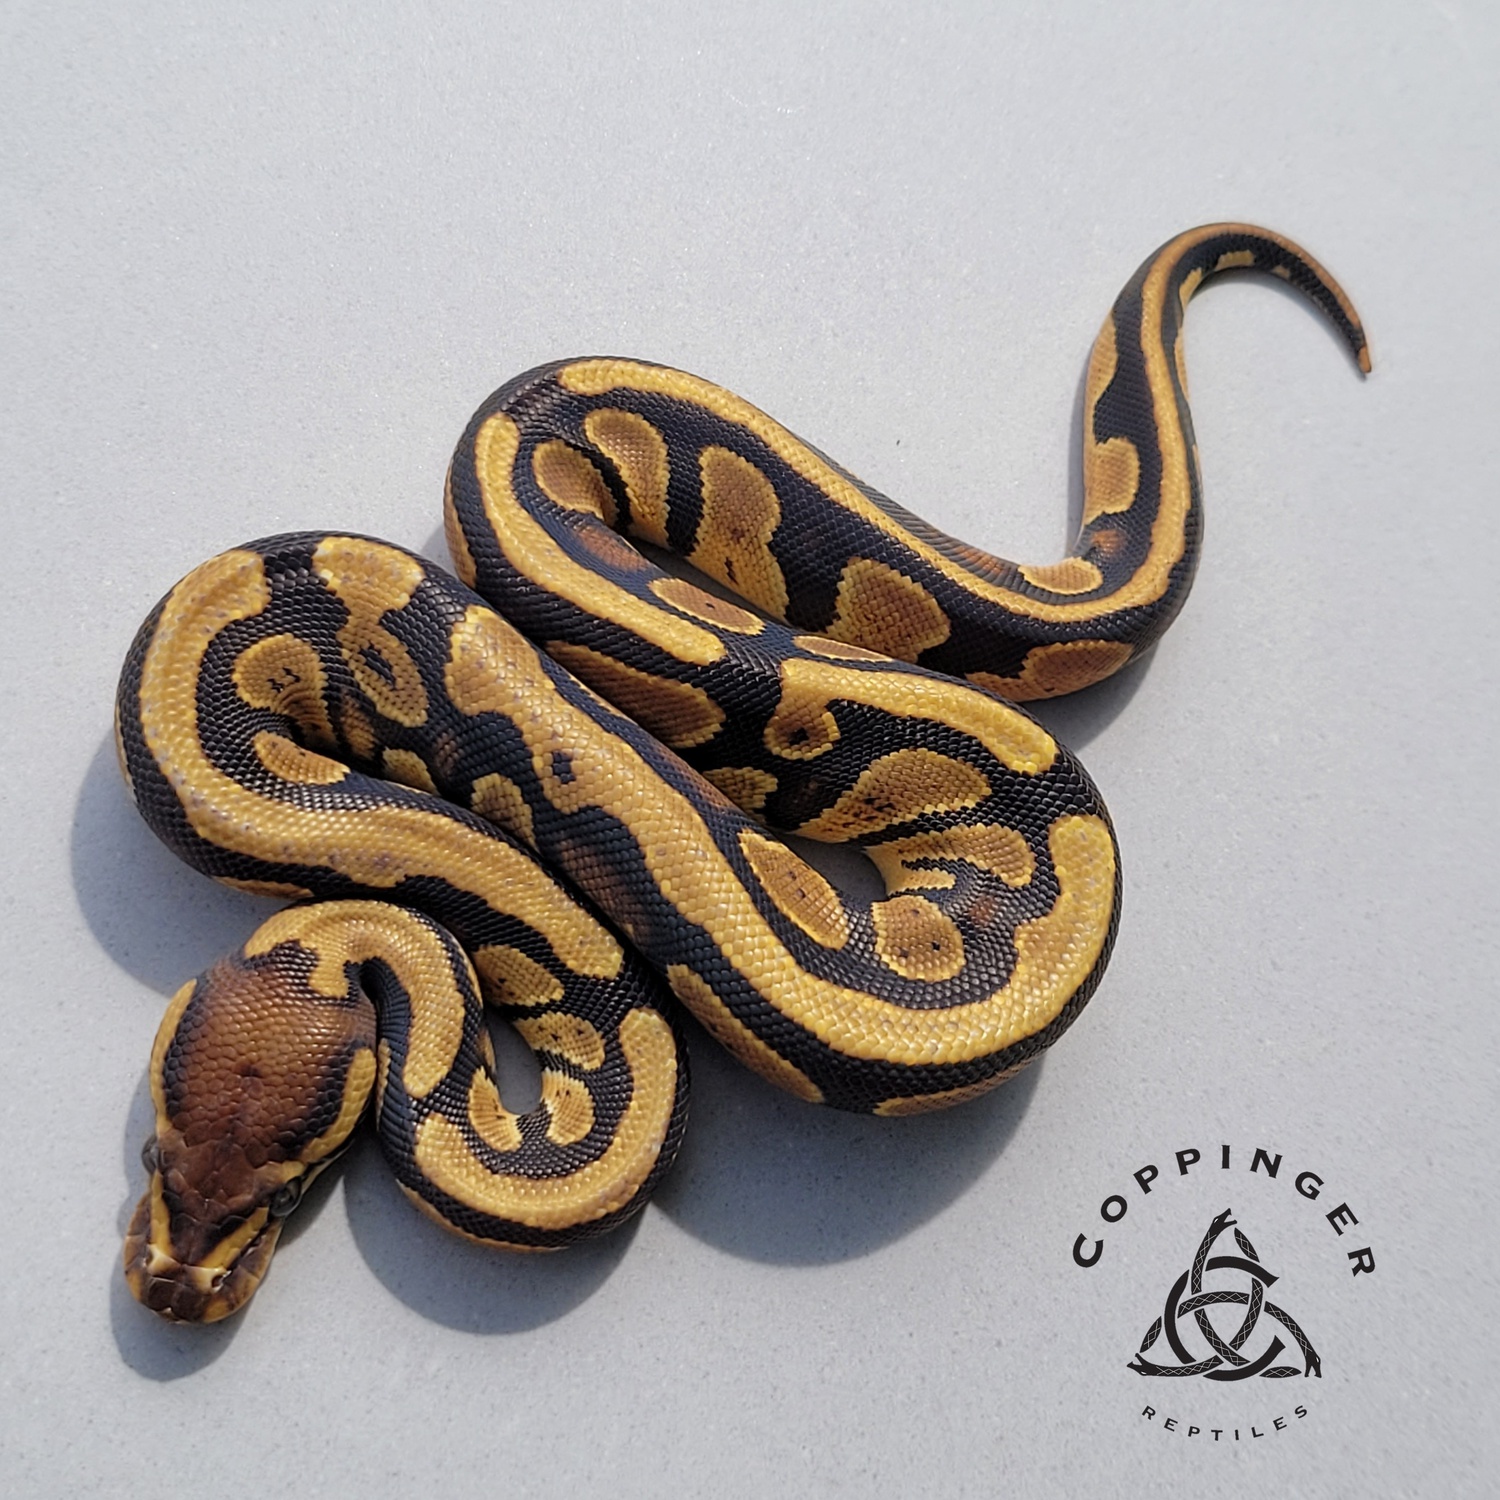 Gene X Het Pied Possible Yellow Belly Ball Python by Coppinger Reptile Co.